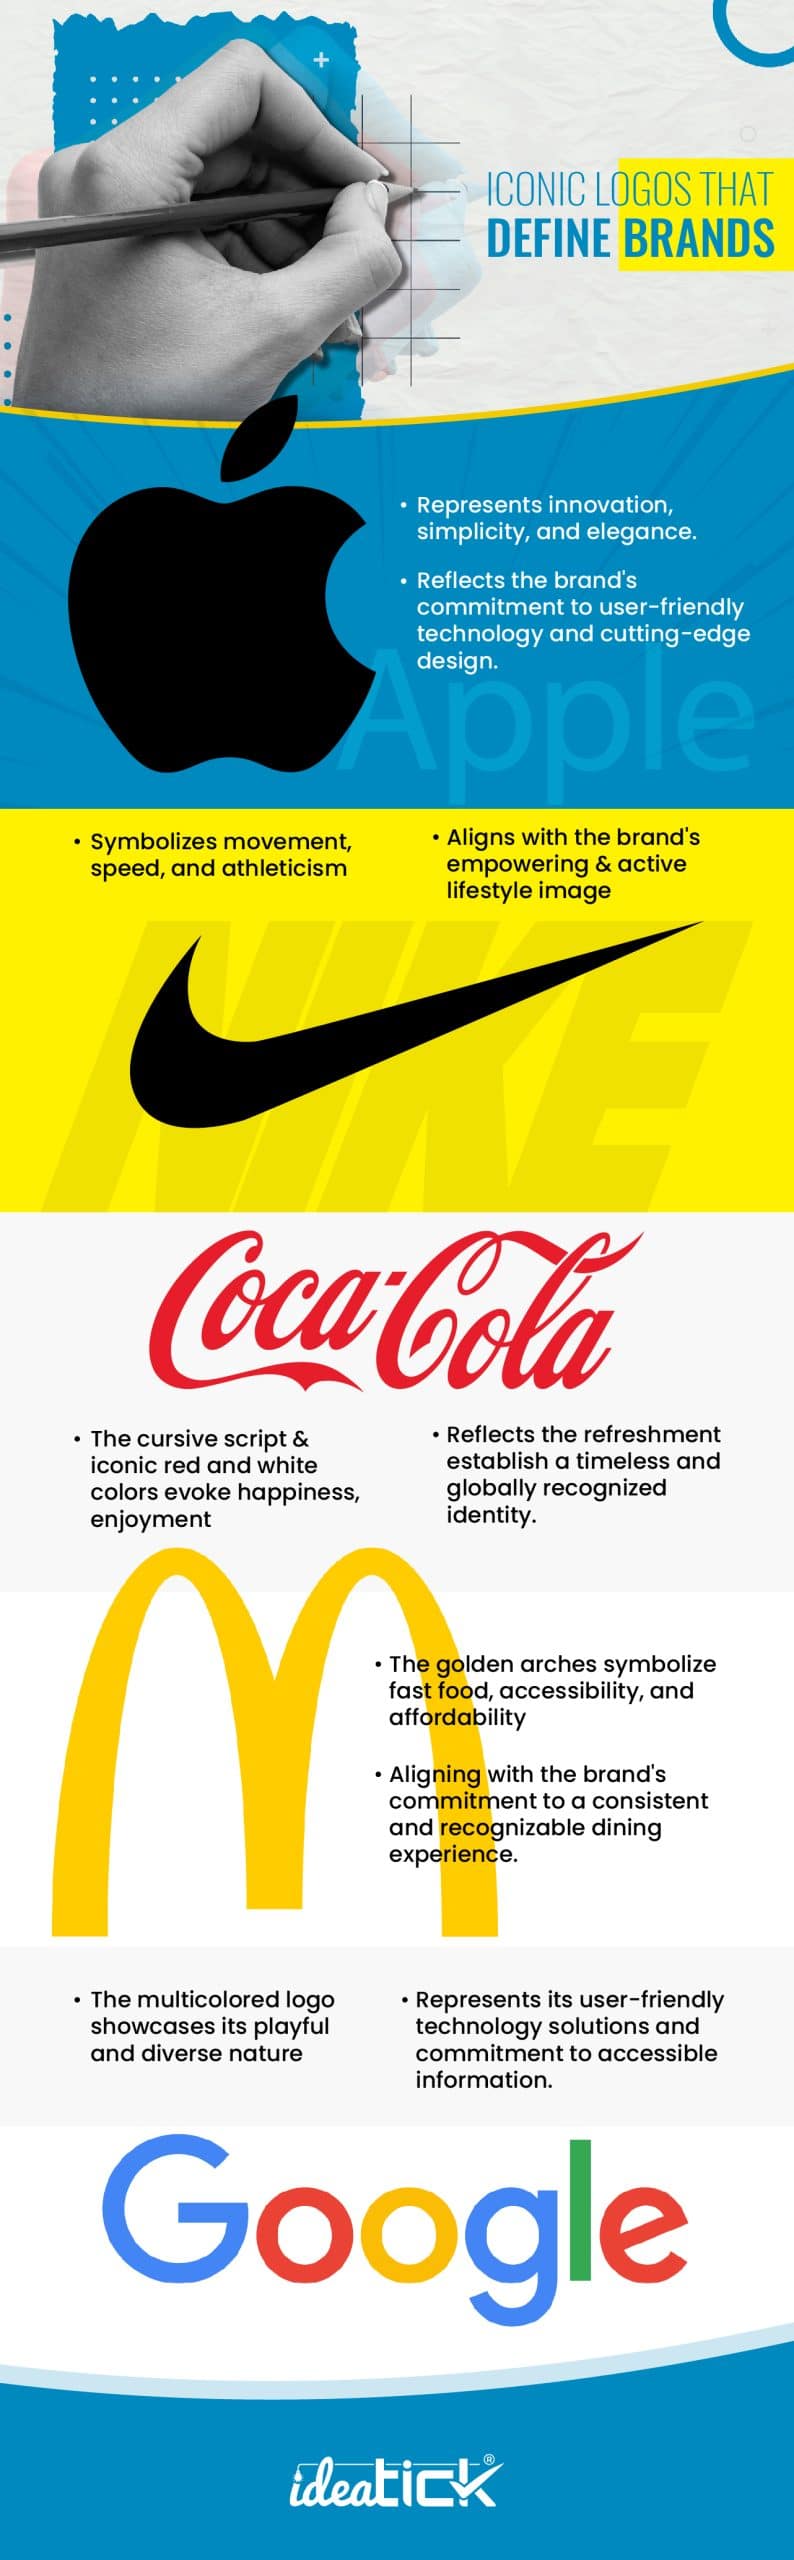 Designing the logo: Creating Memorable Logos: A Guide to Effective Brand Identity